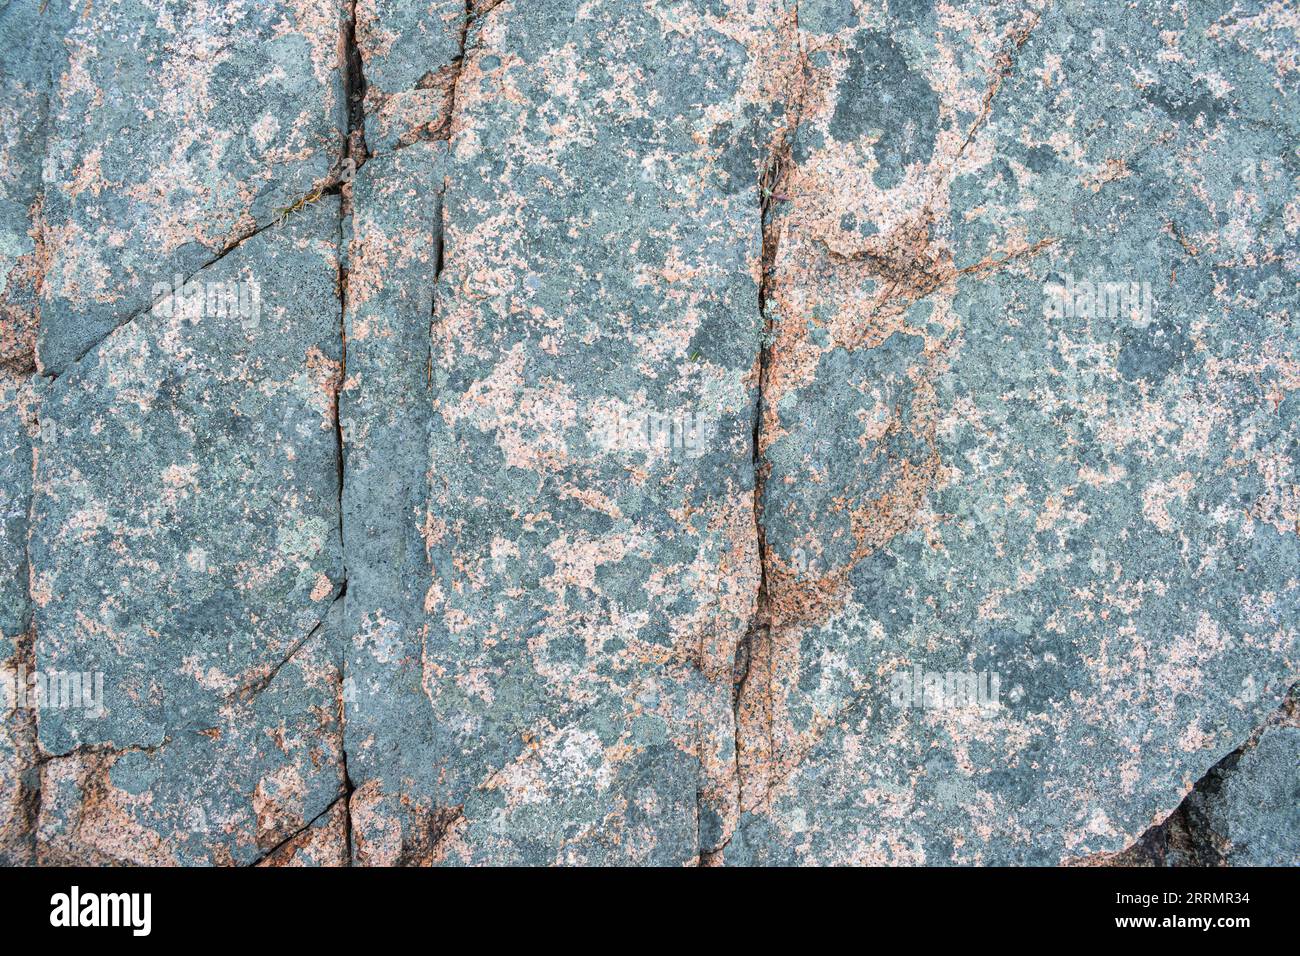 Granite stone natural textures, ideal for grunge style backgrounds for websites and other publications Stock Photo